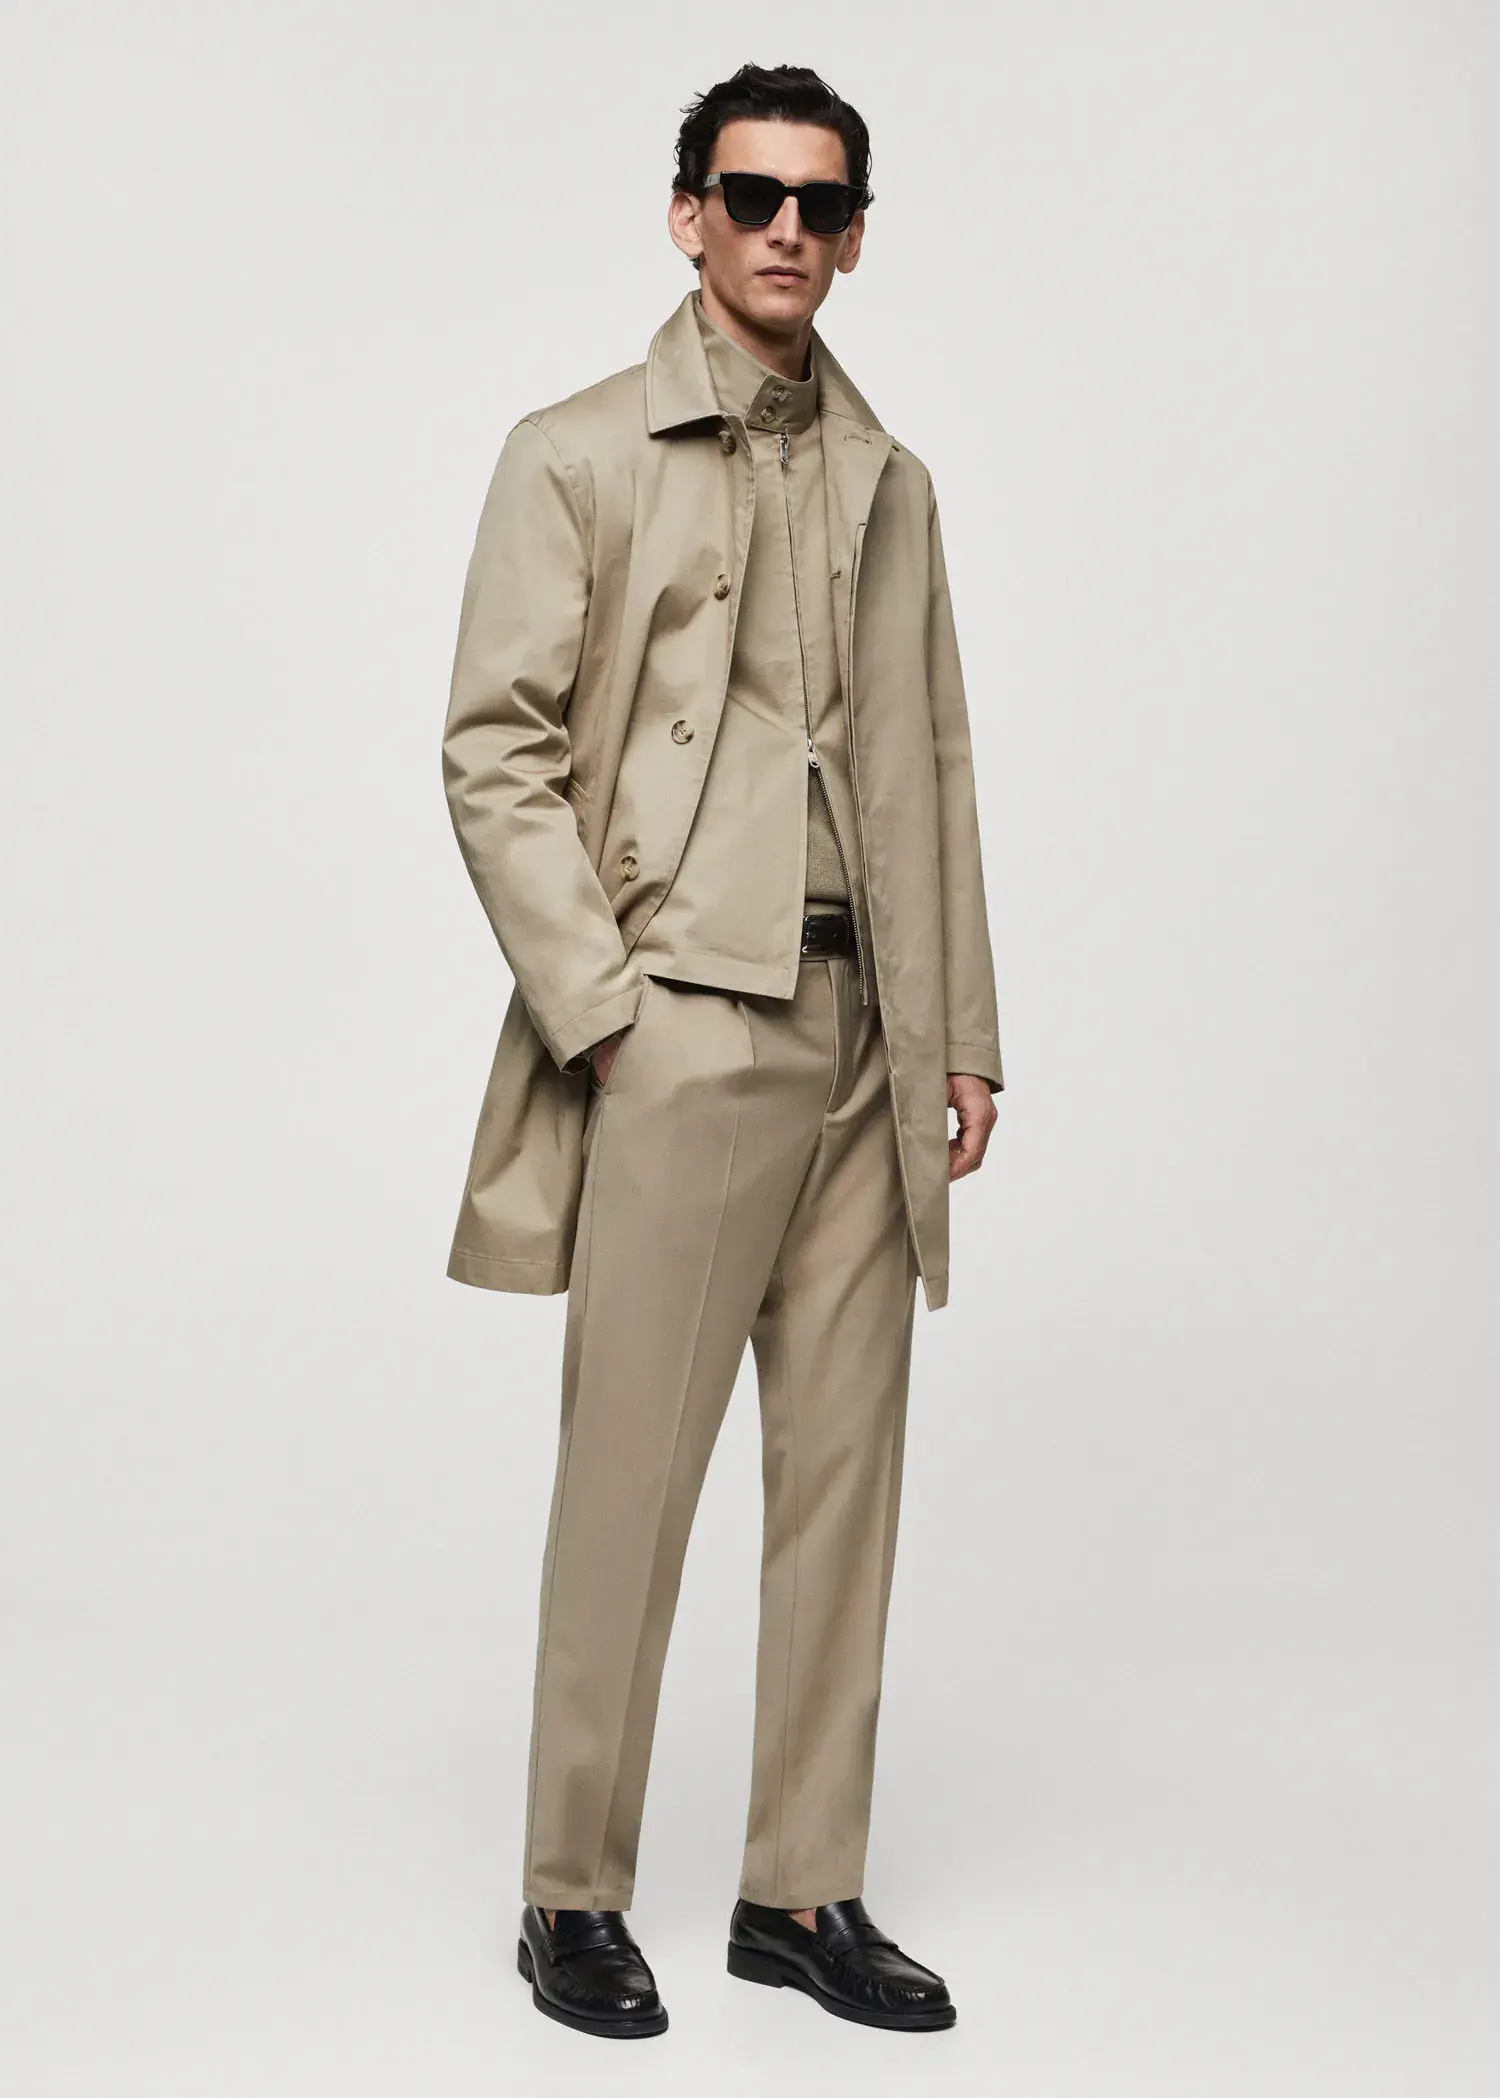 Mango Cotton trench coat with collar detail. 2